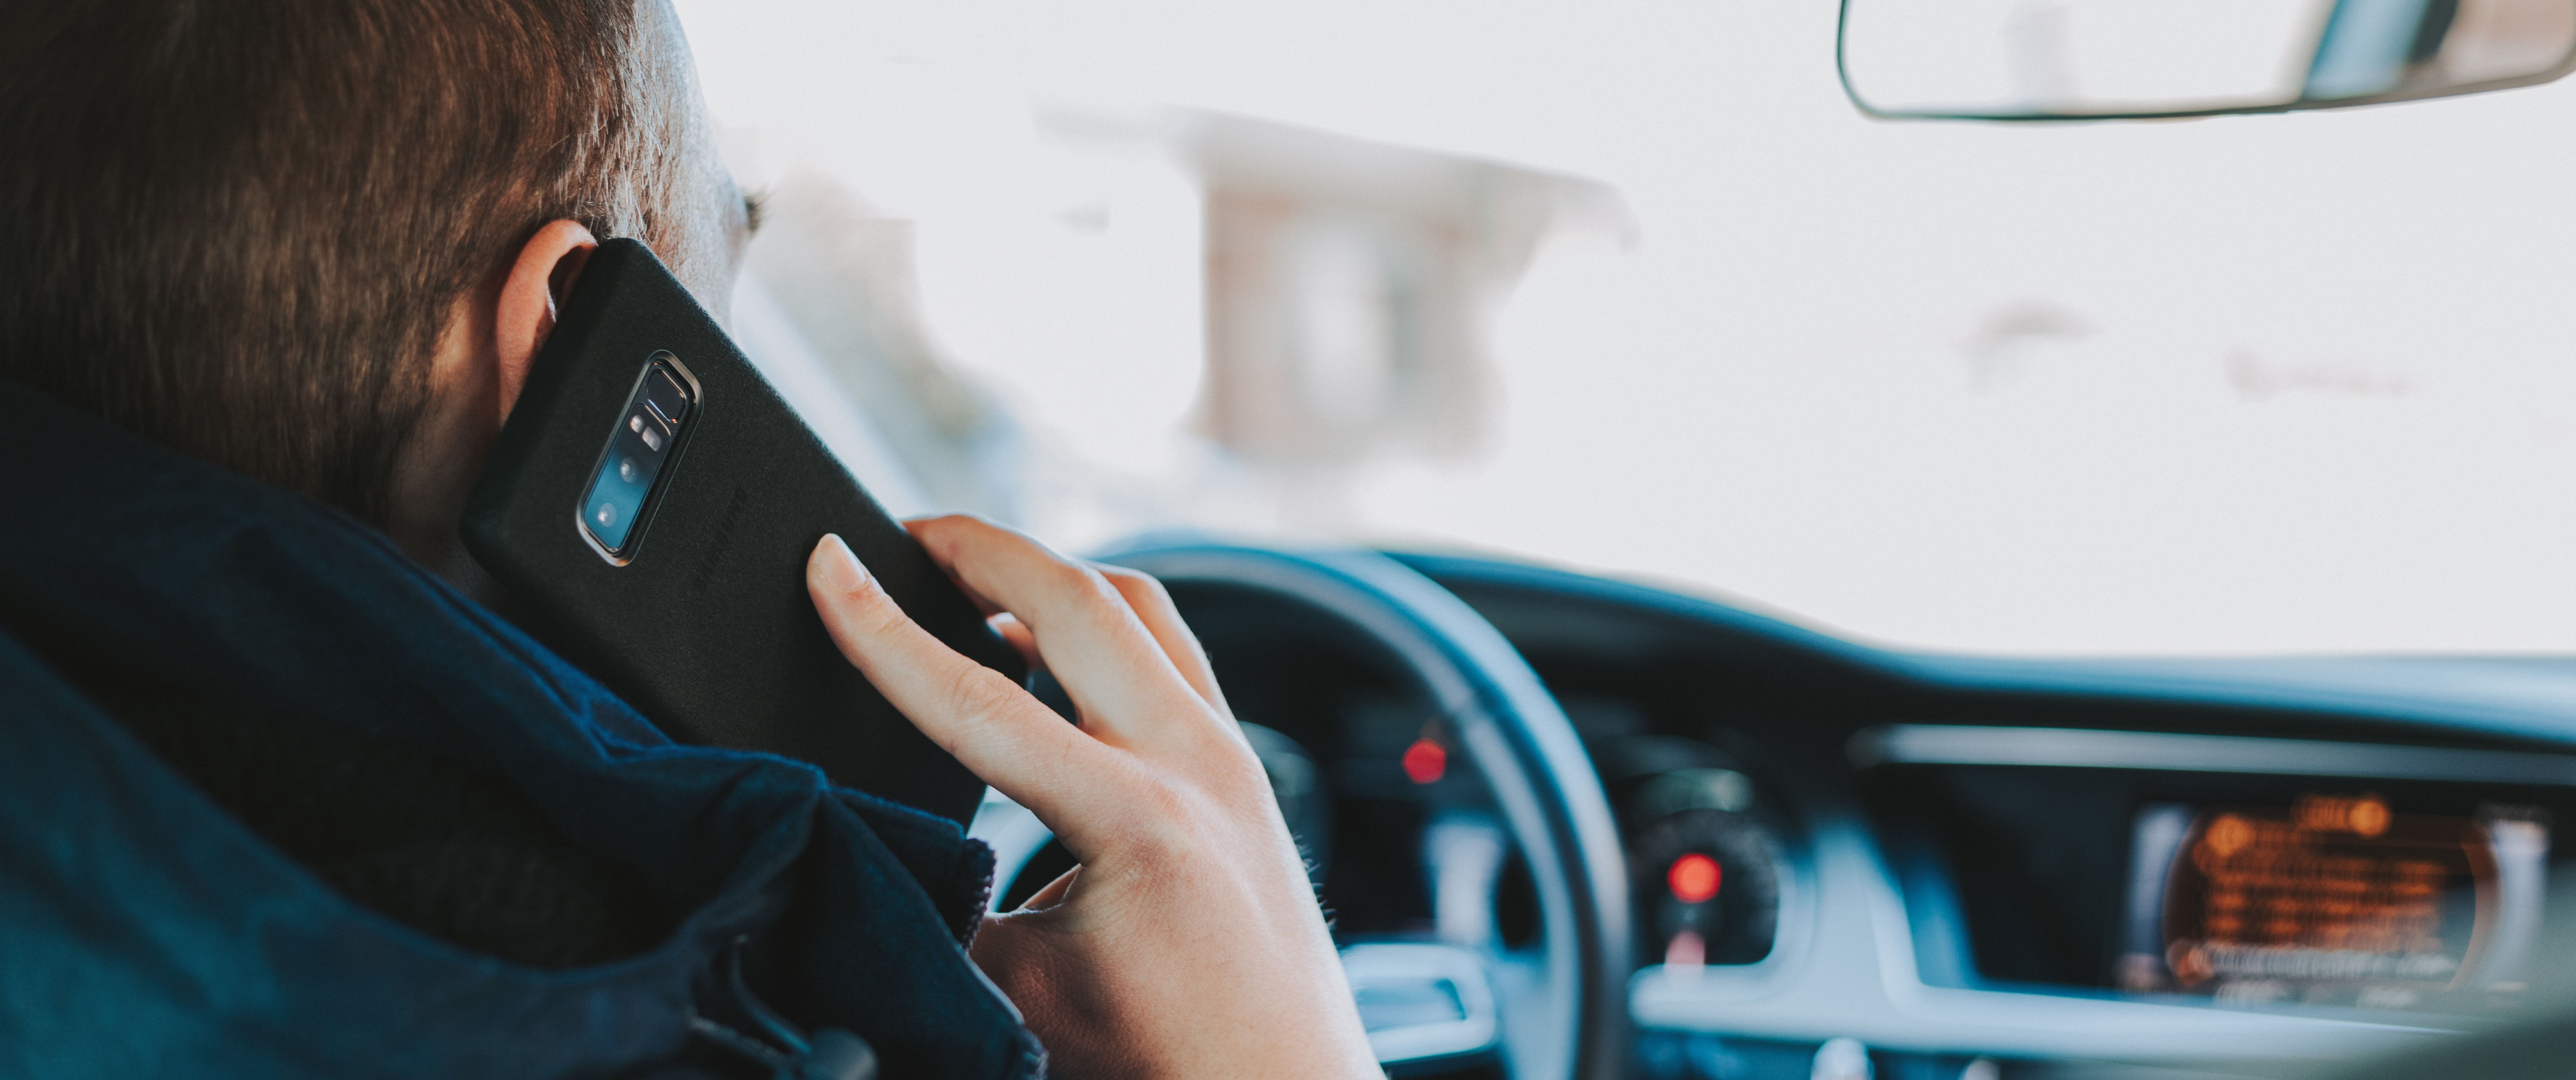 It’s Time to Have (Another) Talk About Distracted Driving